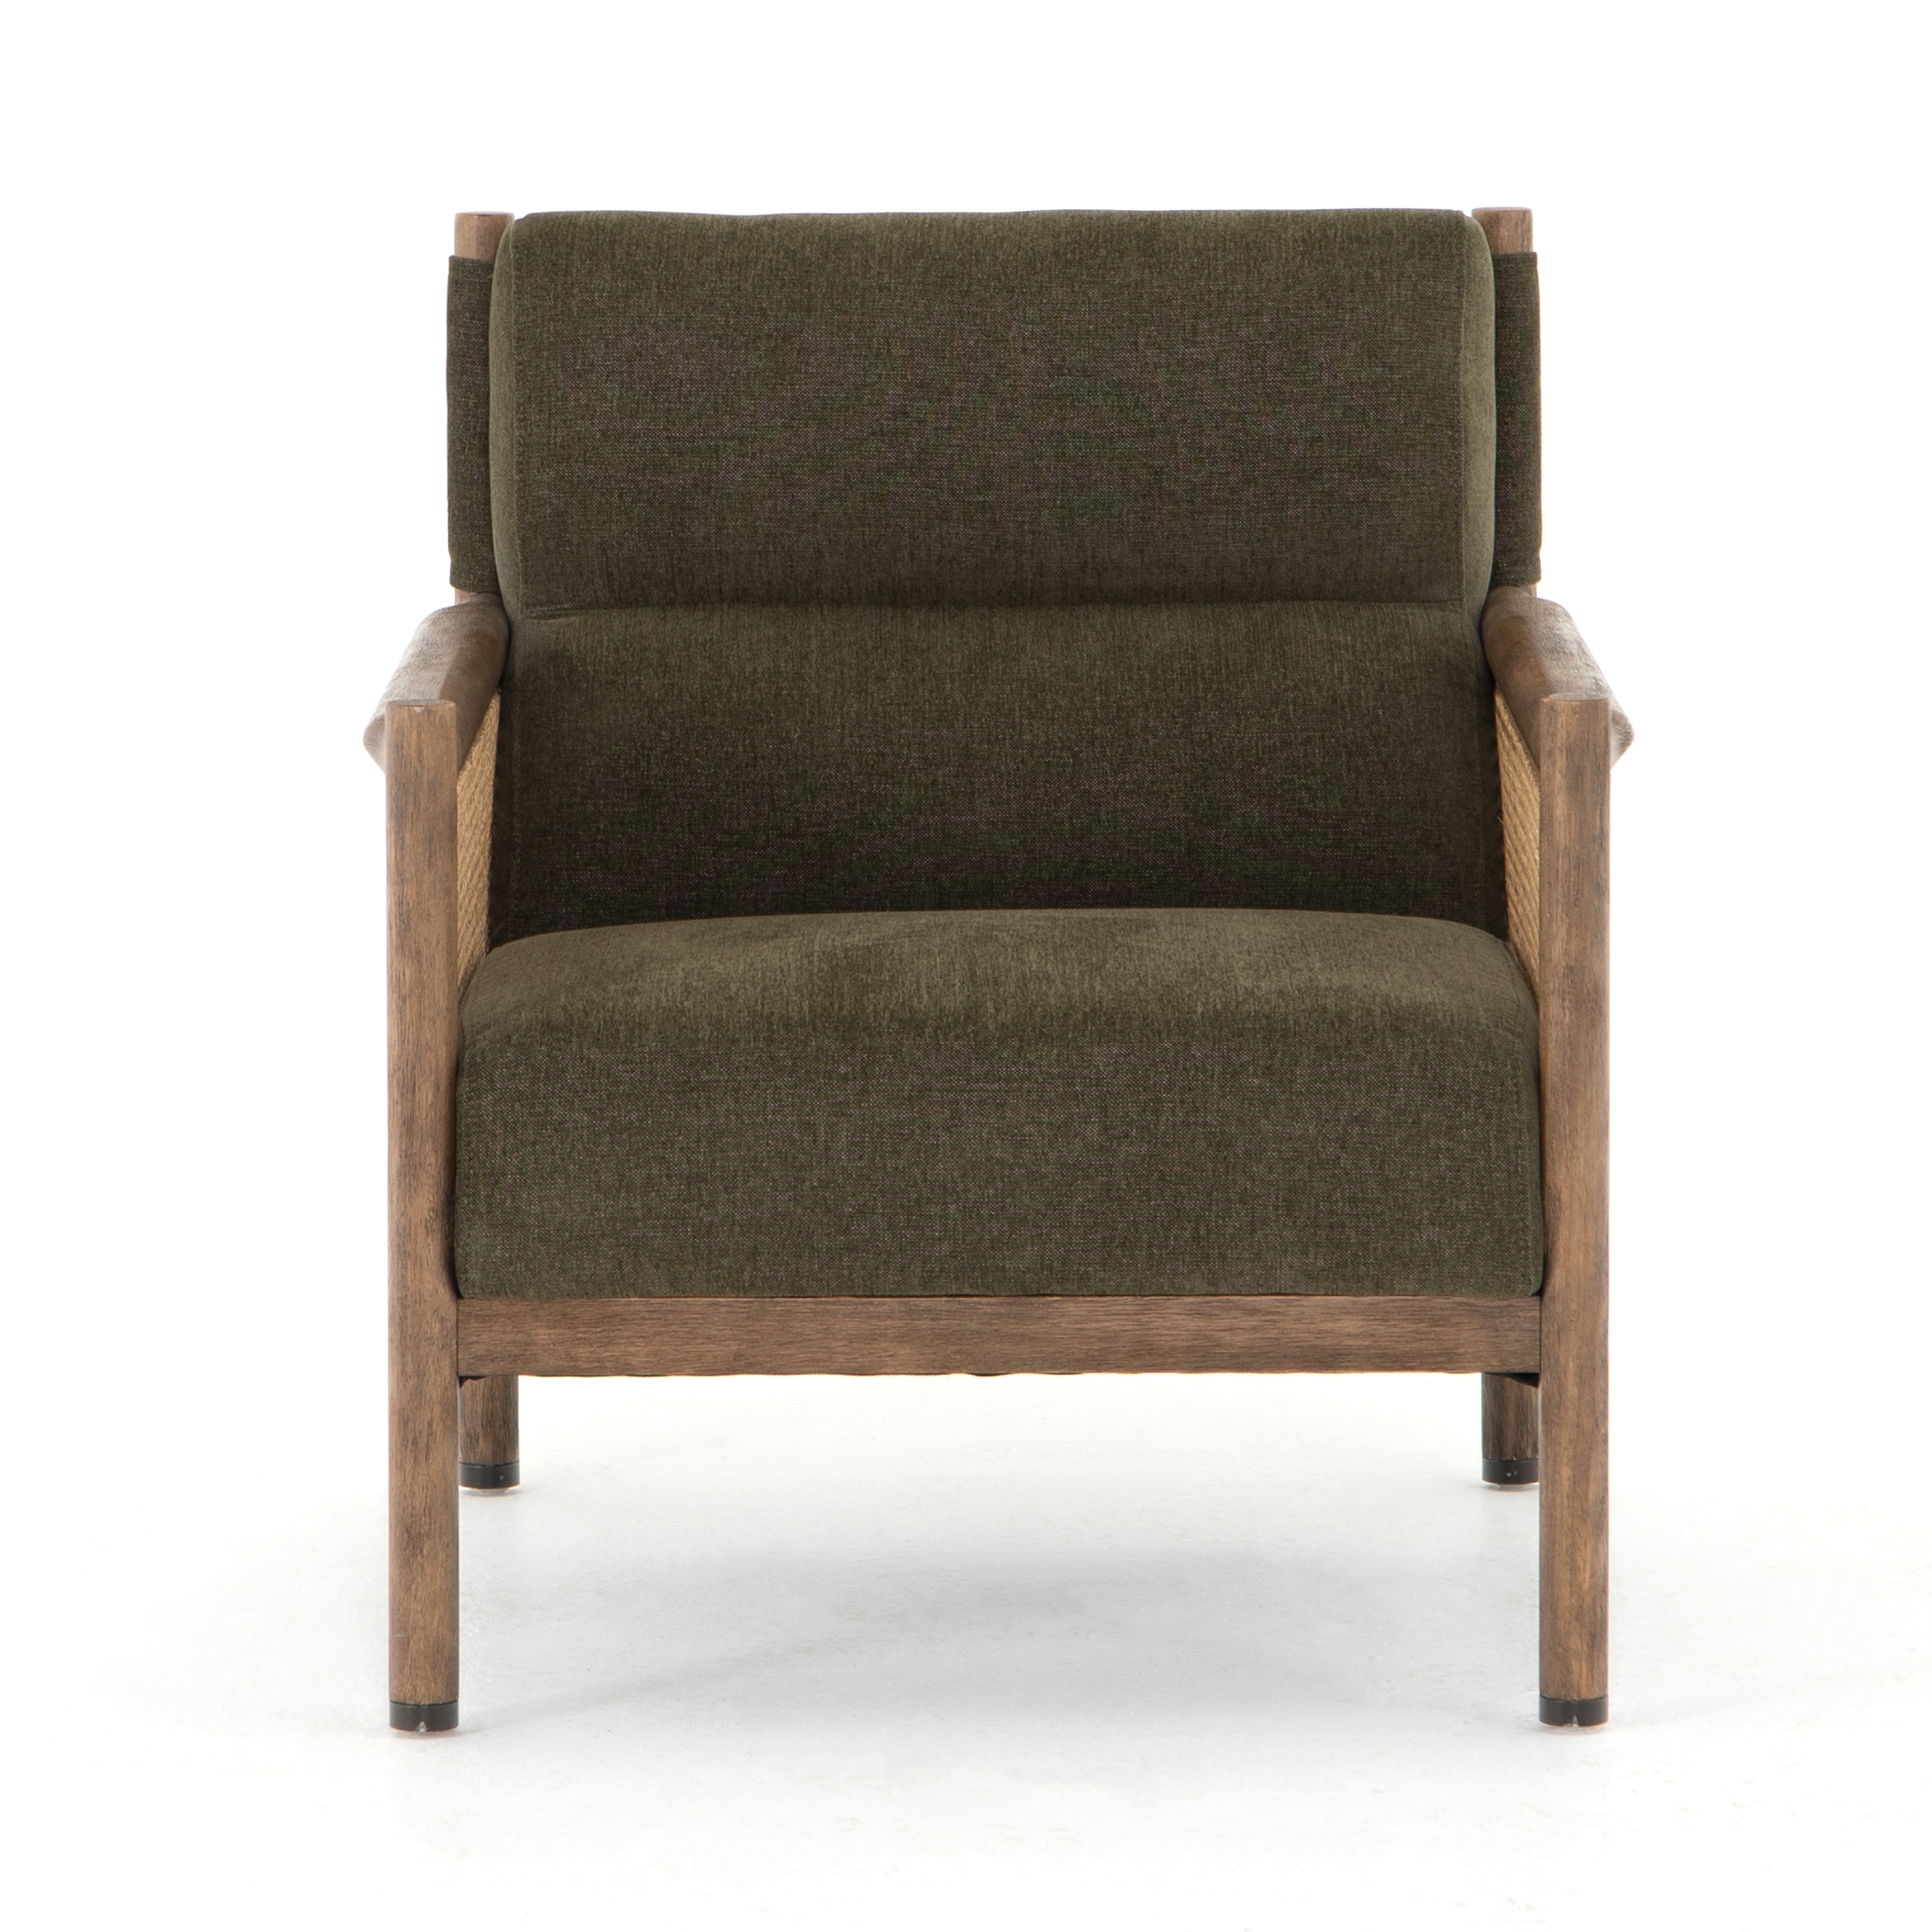 Kempsey Chair-Sutton Olive - Image 2